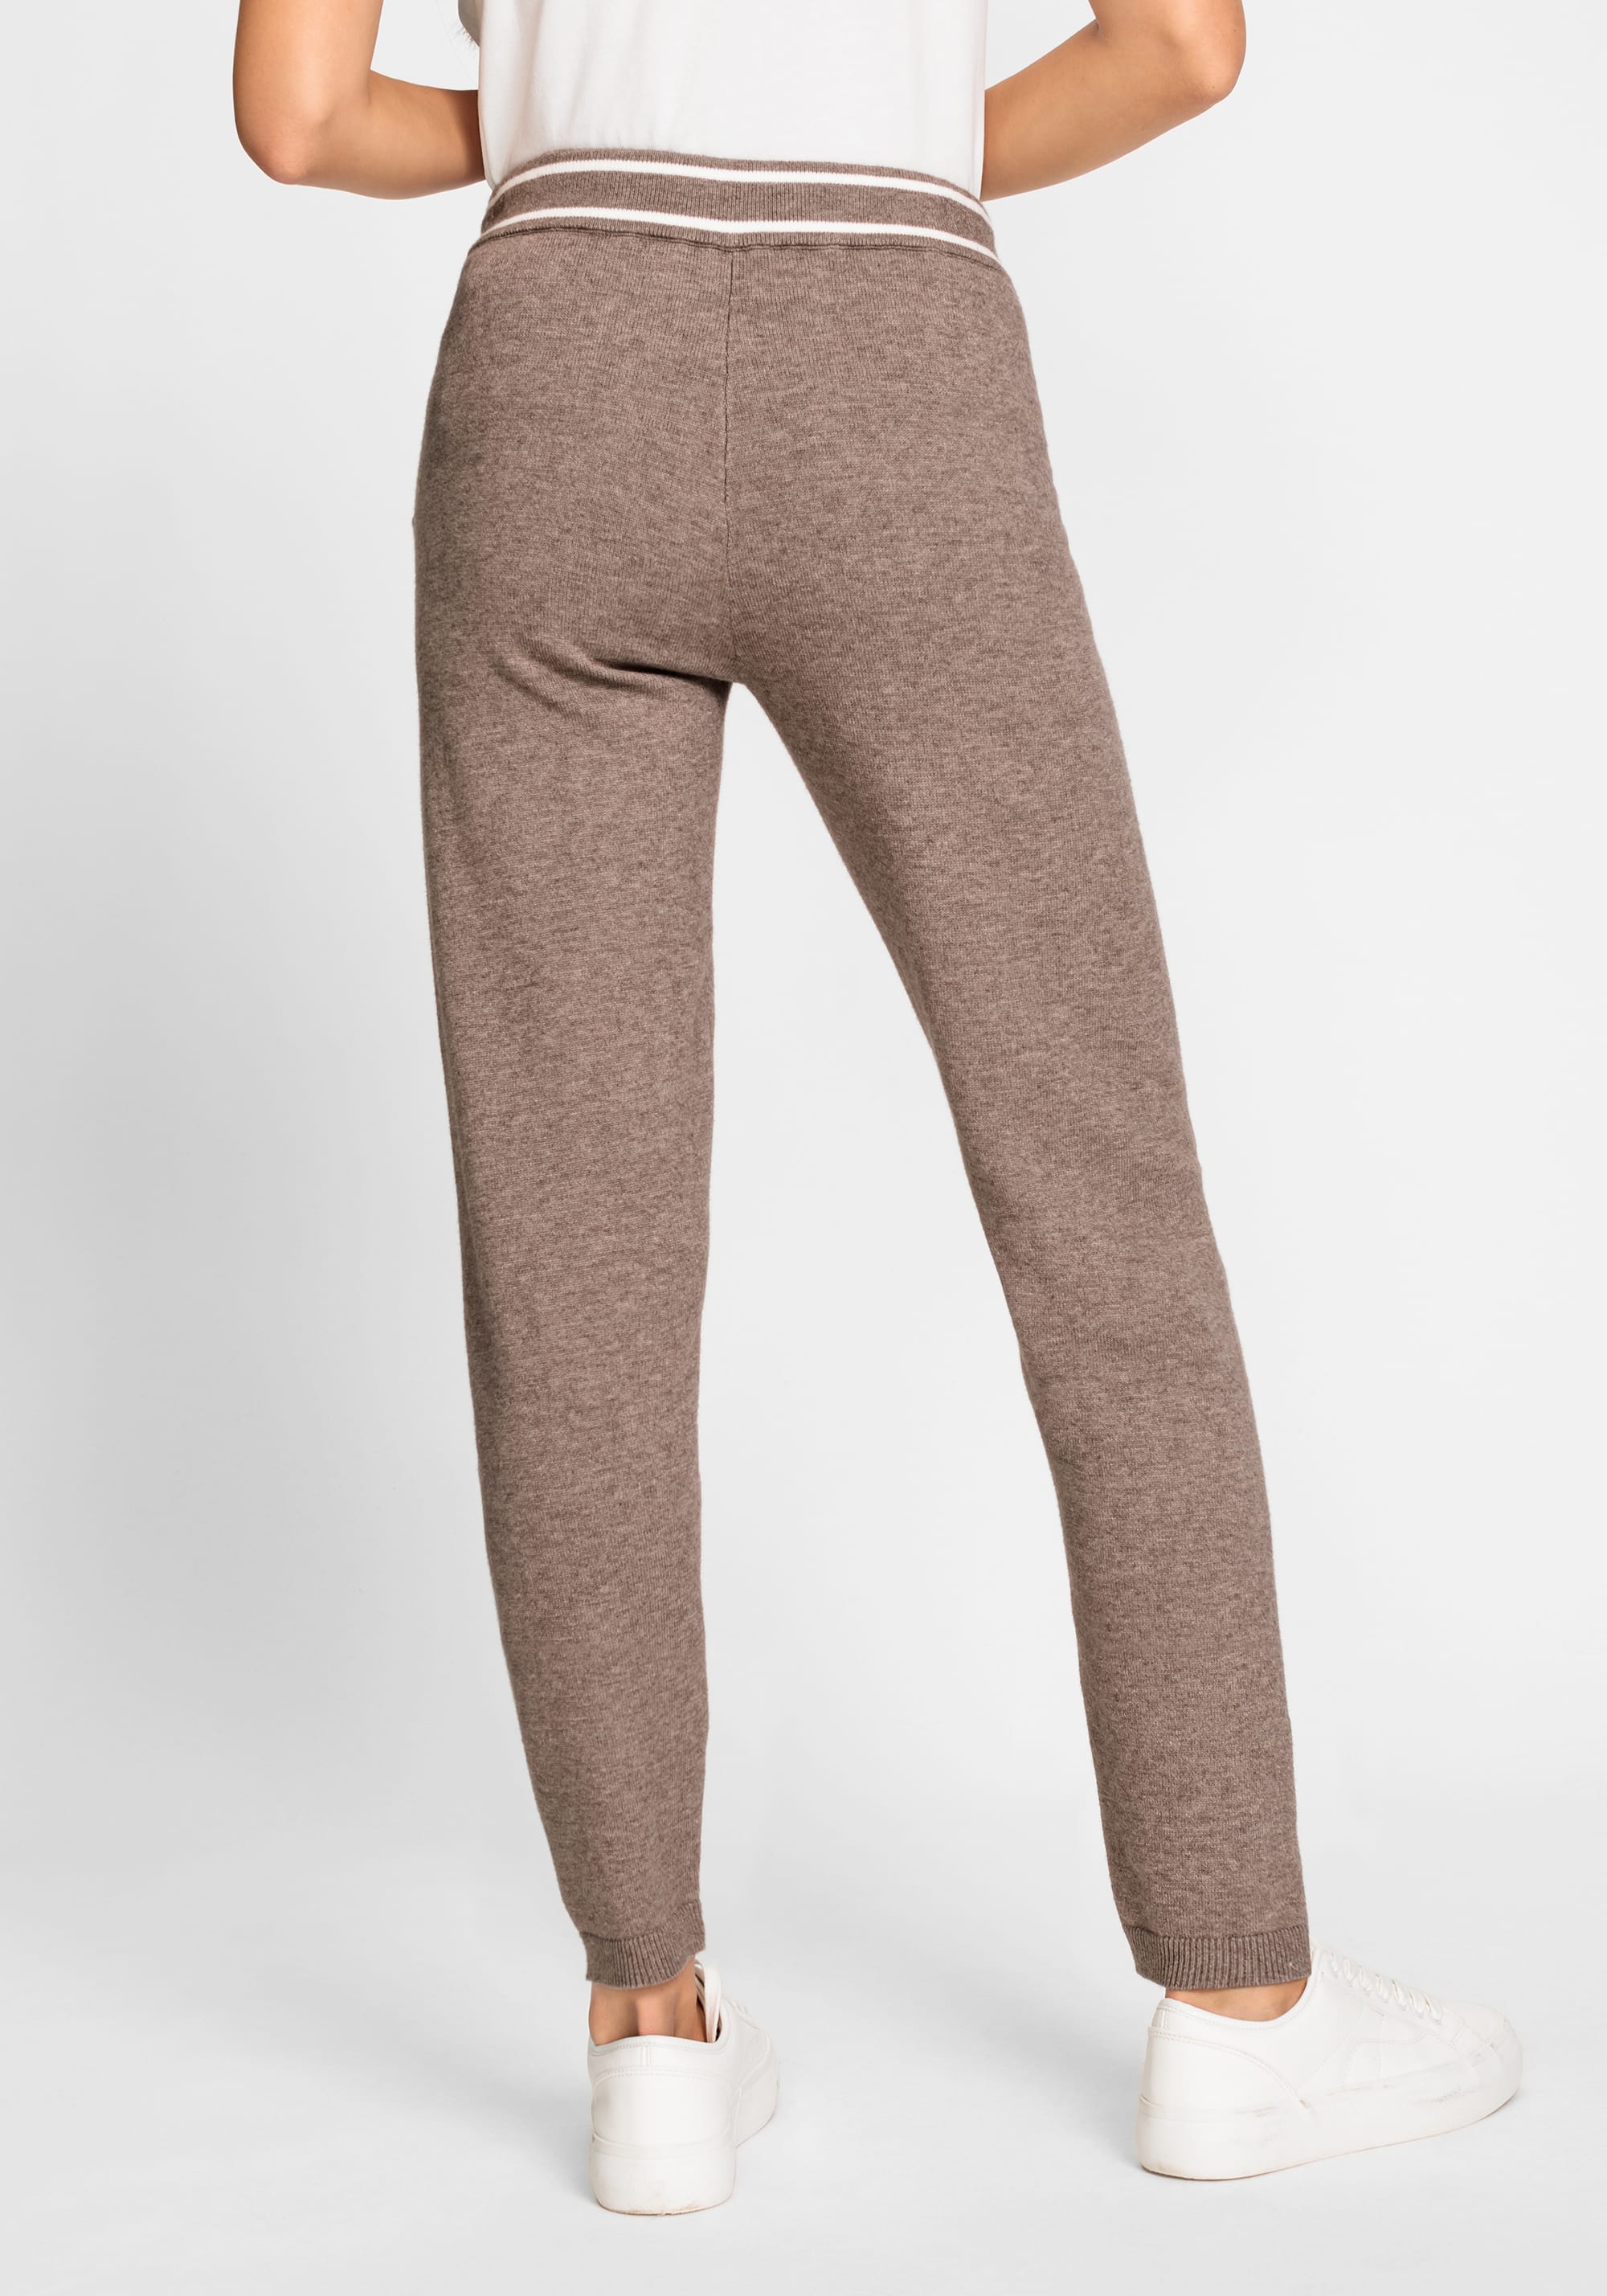 Lisa Fit Sweater Knit Pant - Olsen Fashion Canada